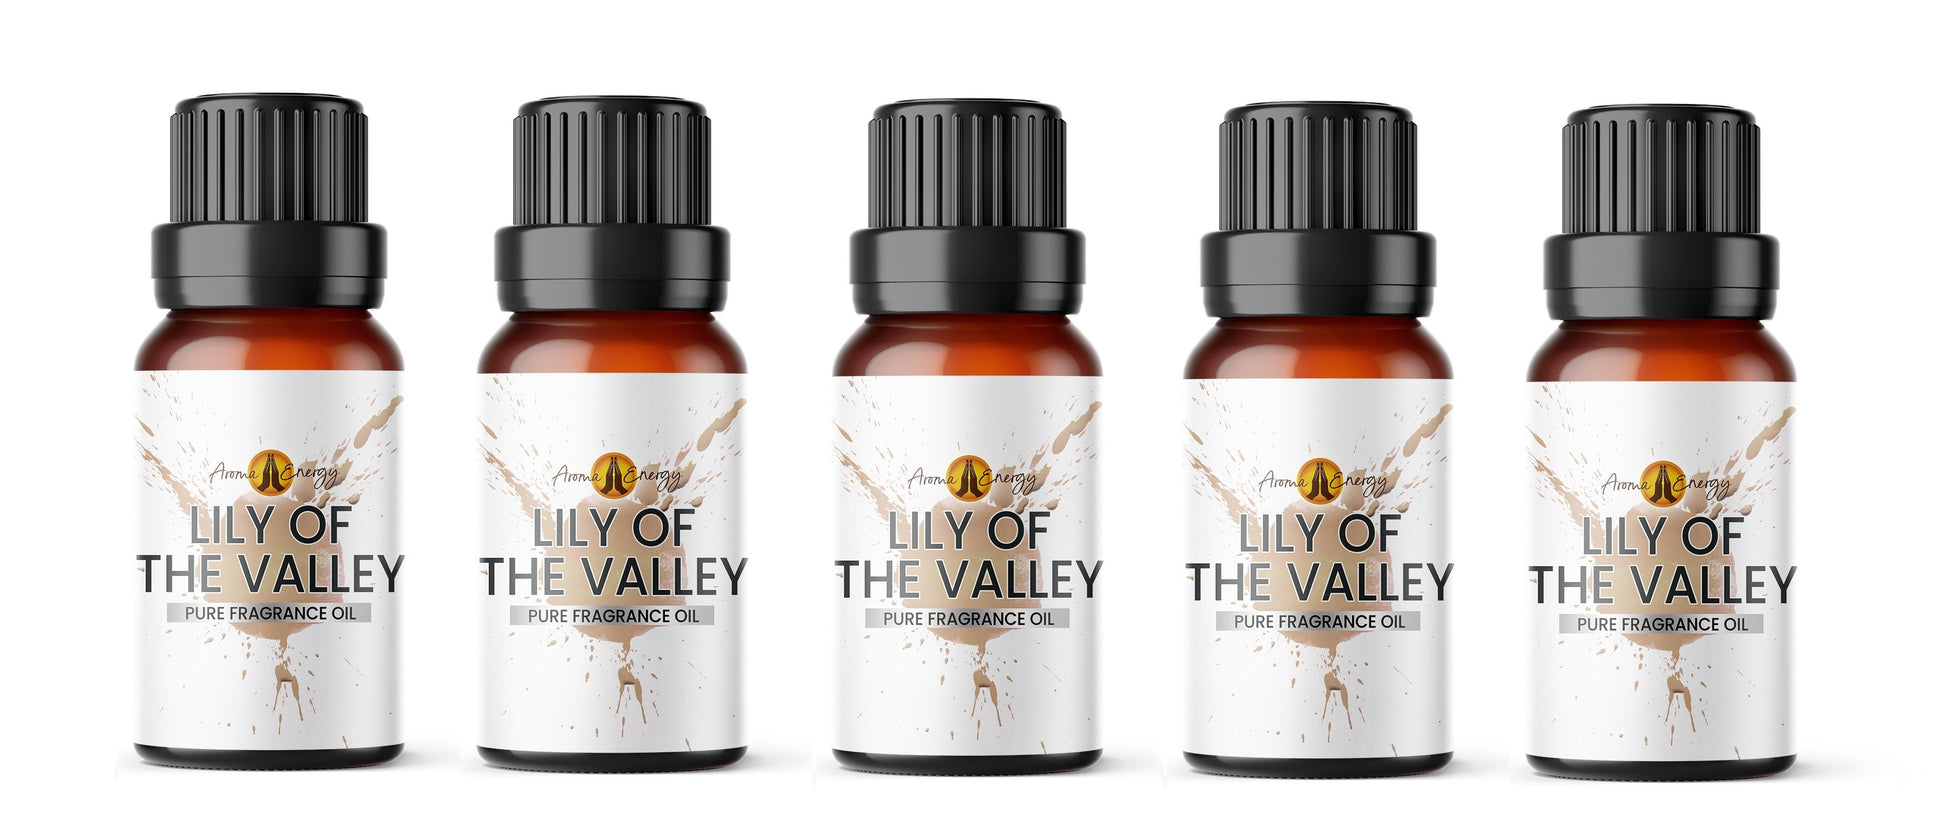 Lily of the Valley Fragrance Oil - Aroma Energy